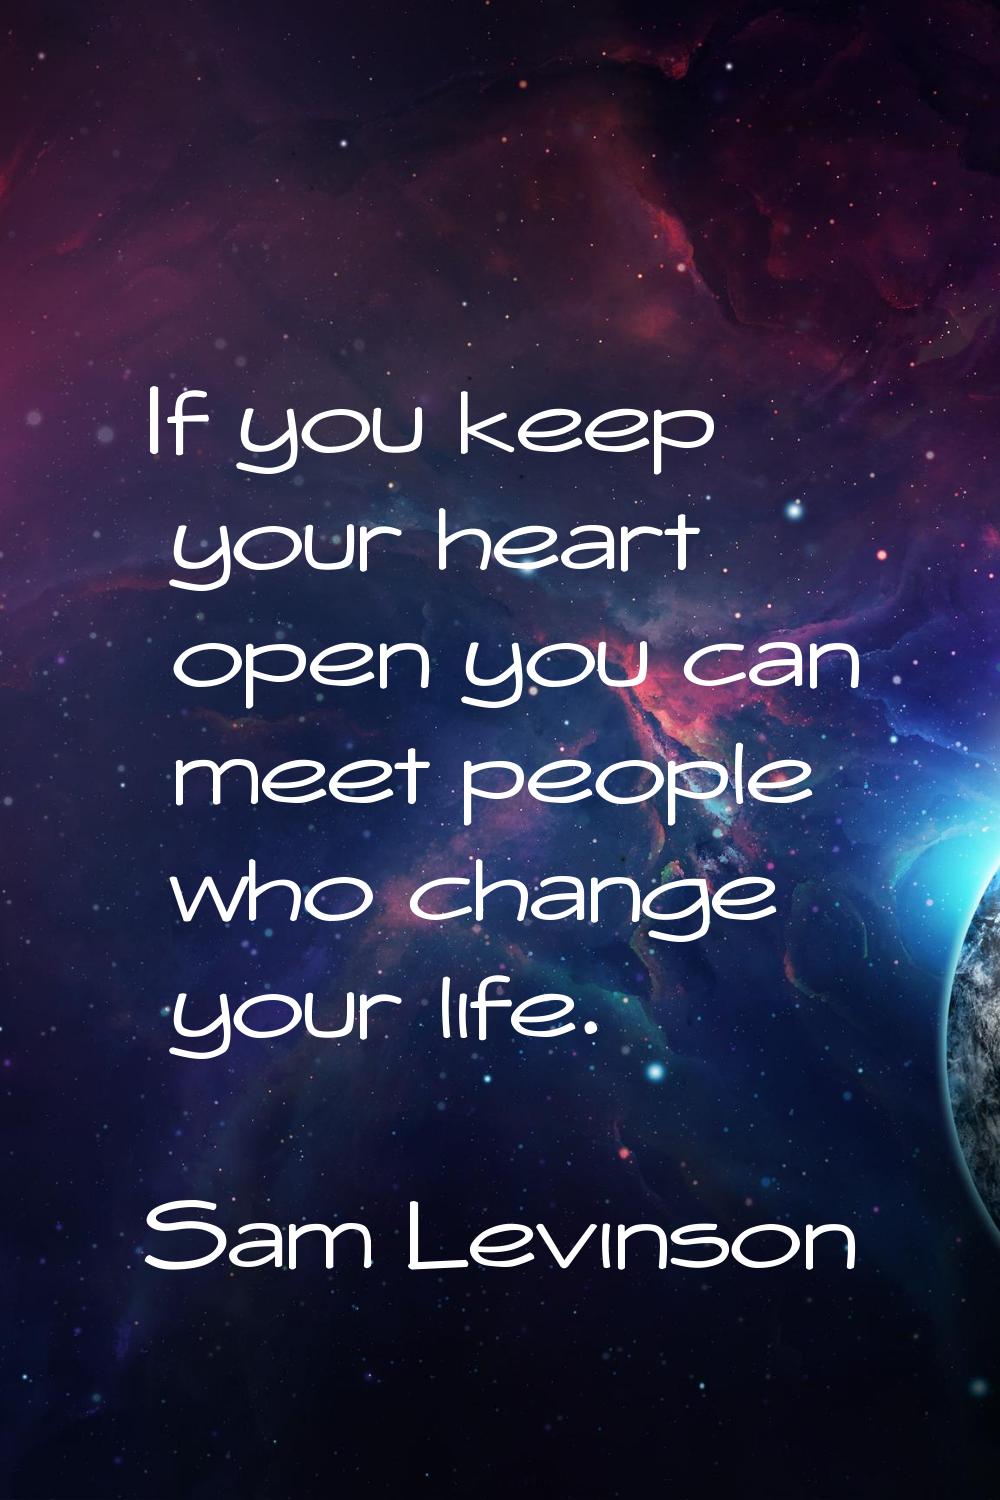 If you keep your heart open you can meet people who change your life.